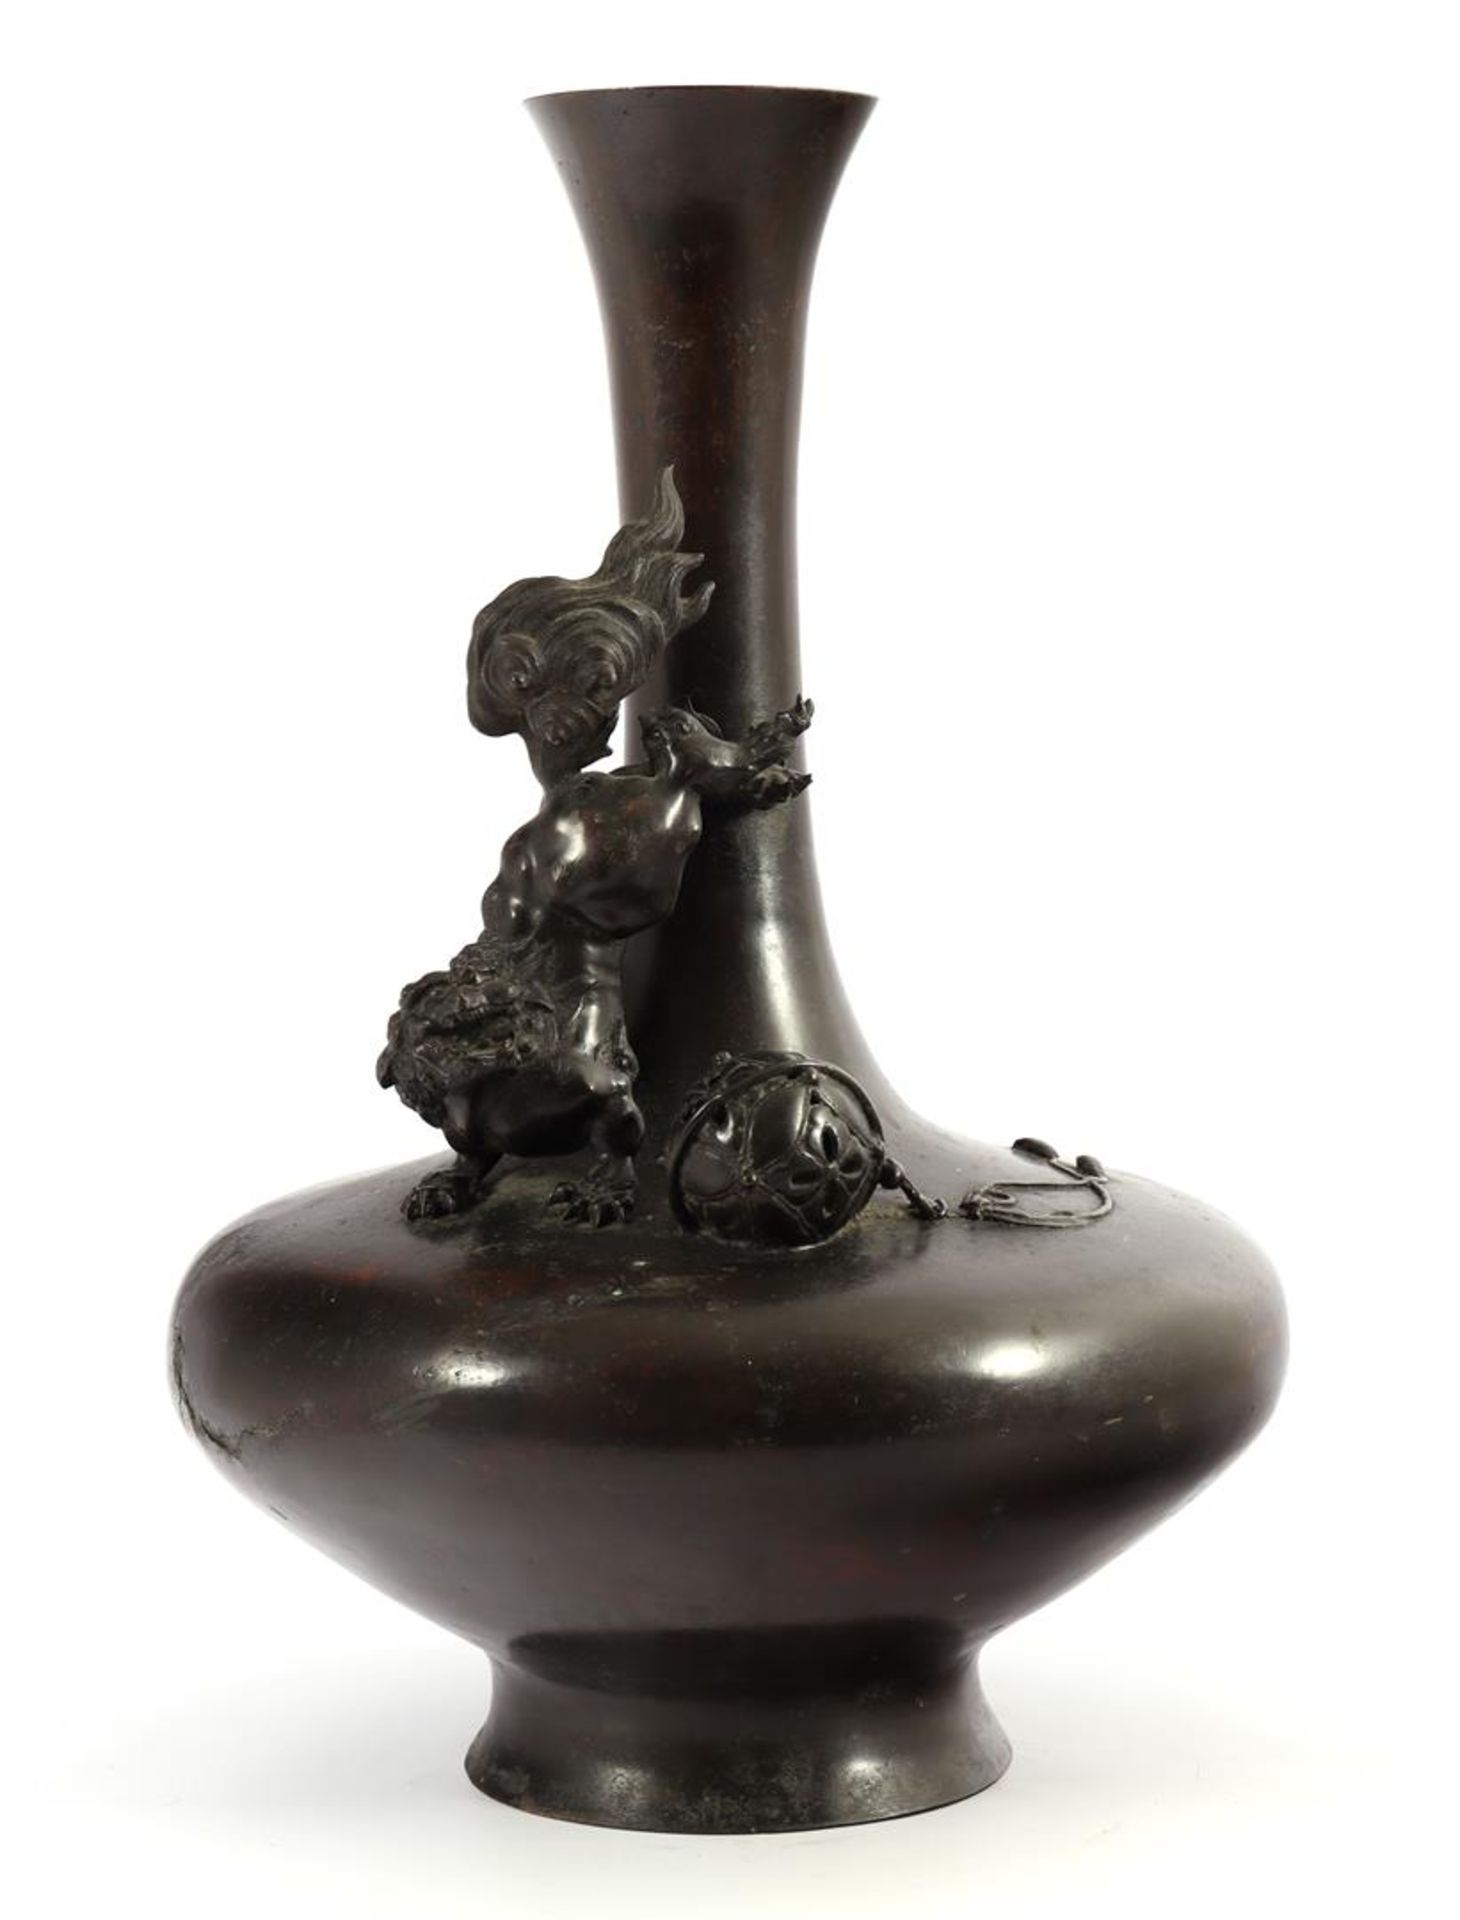 Japanese bronze vase on which standing